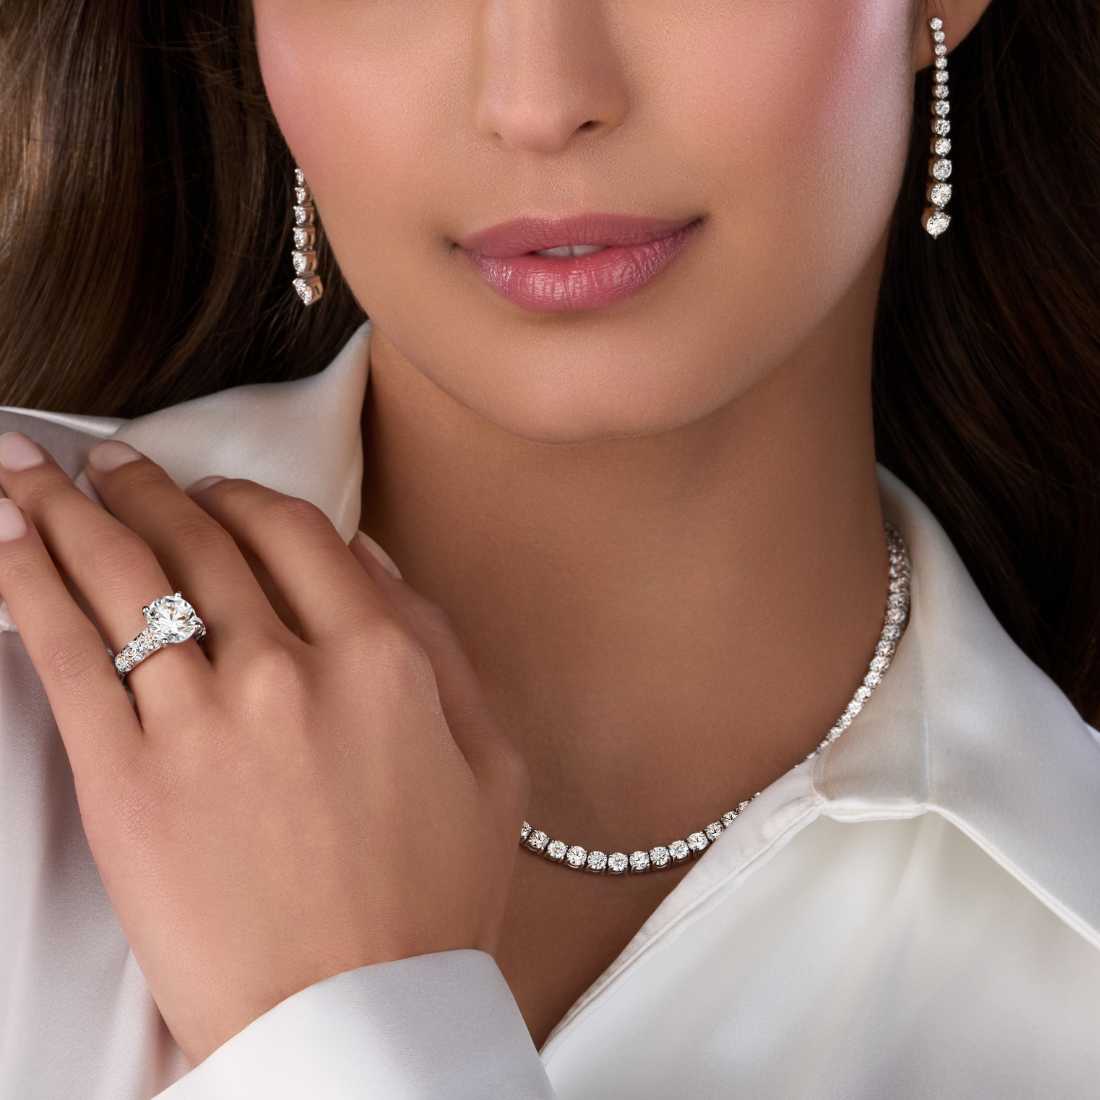 3 carat diamond engagement ring paired with a diamond necklace and diamond earrings